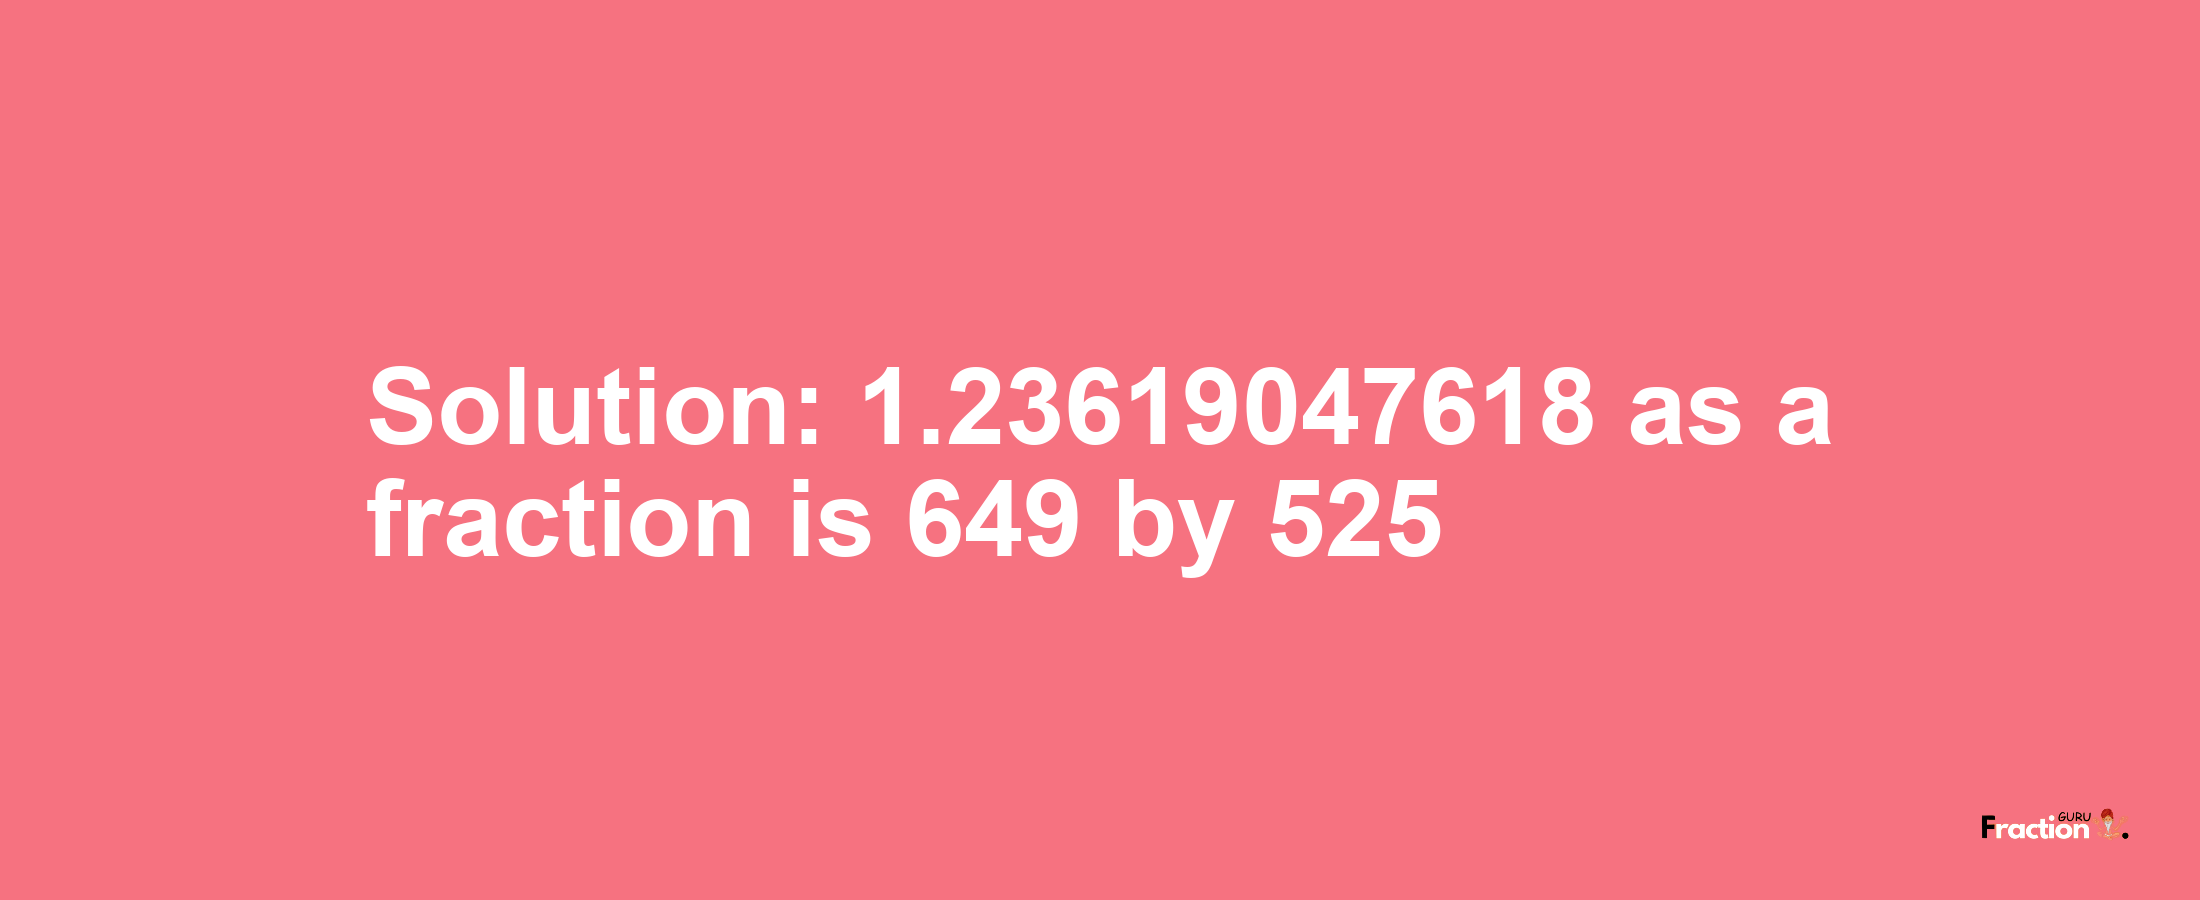 Solution:1.23619047618 as a fraction is 649/525